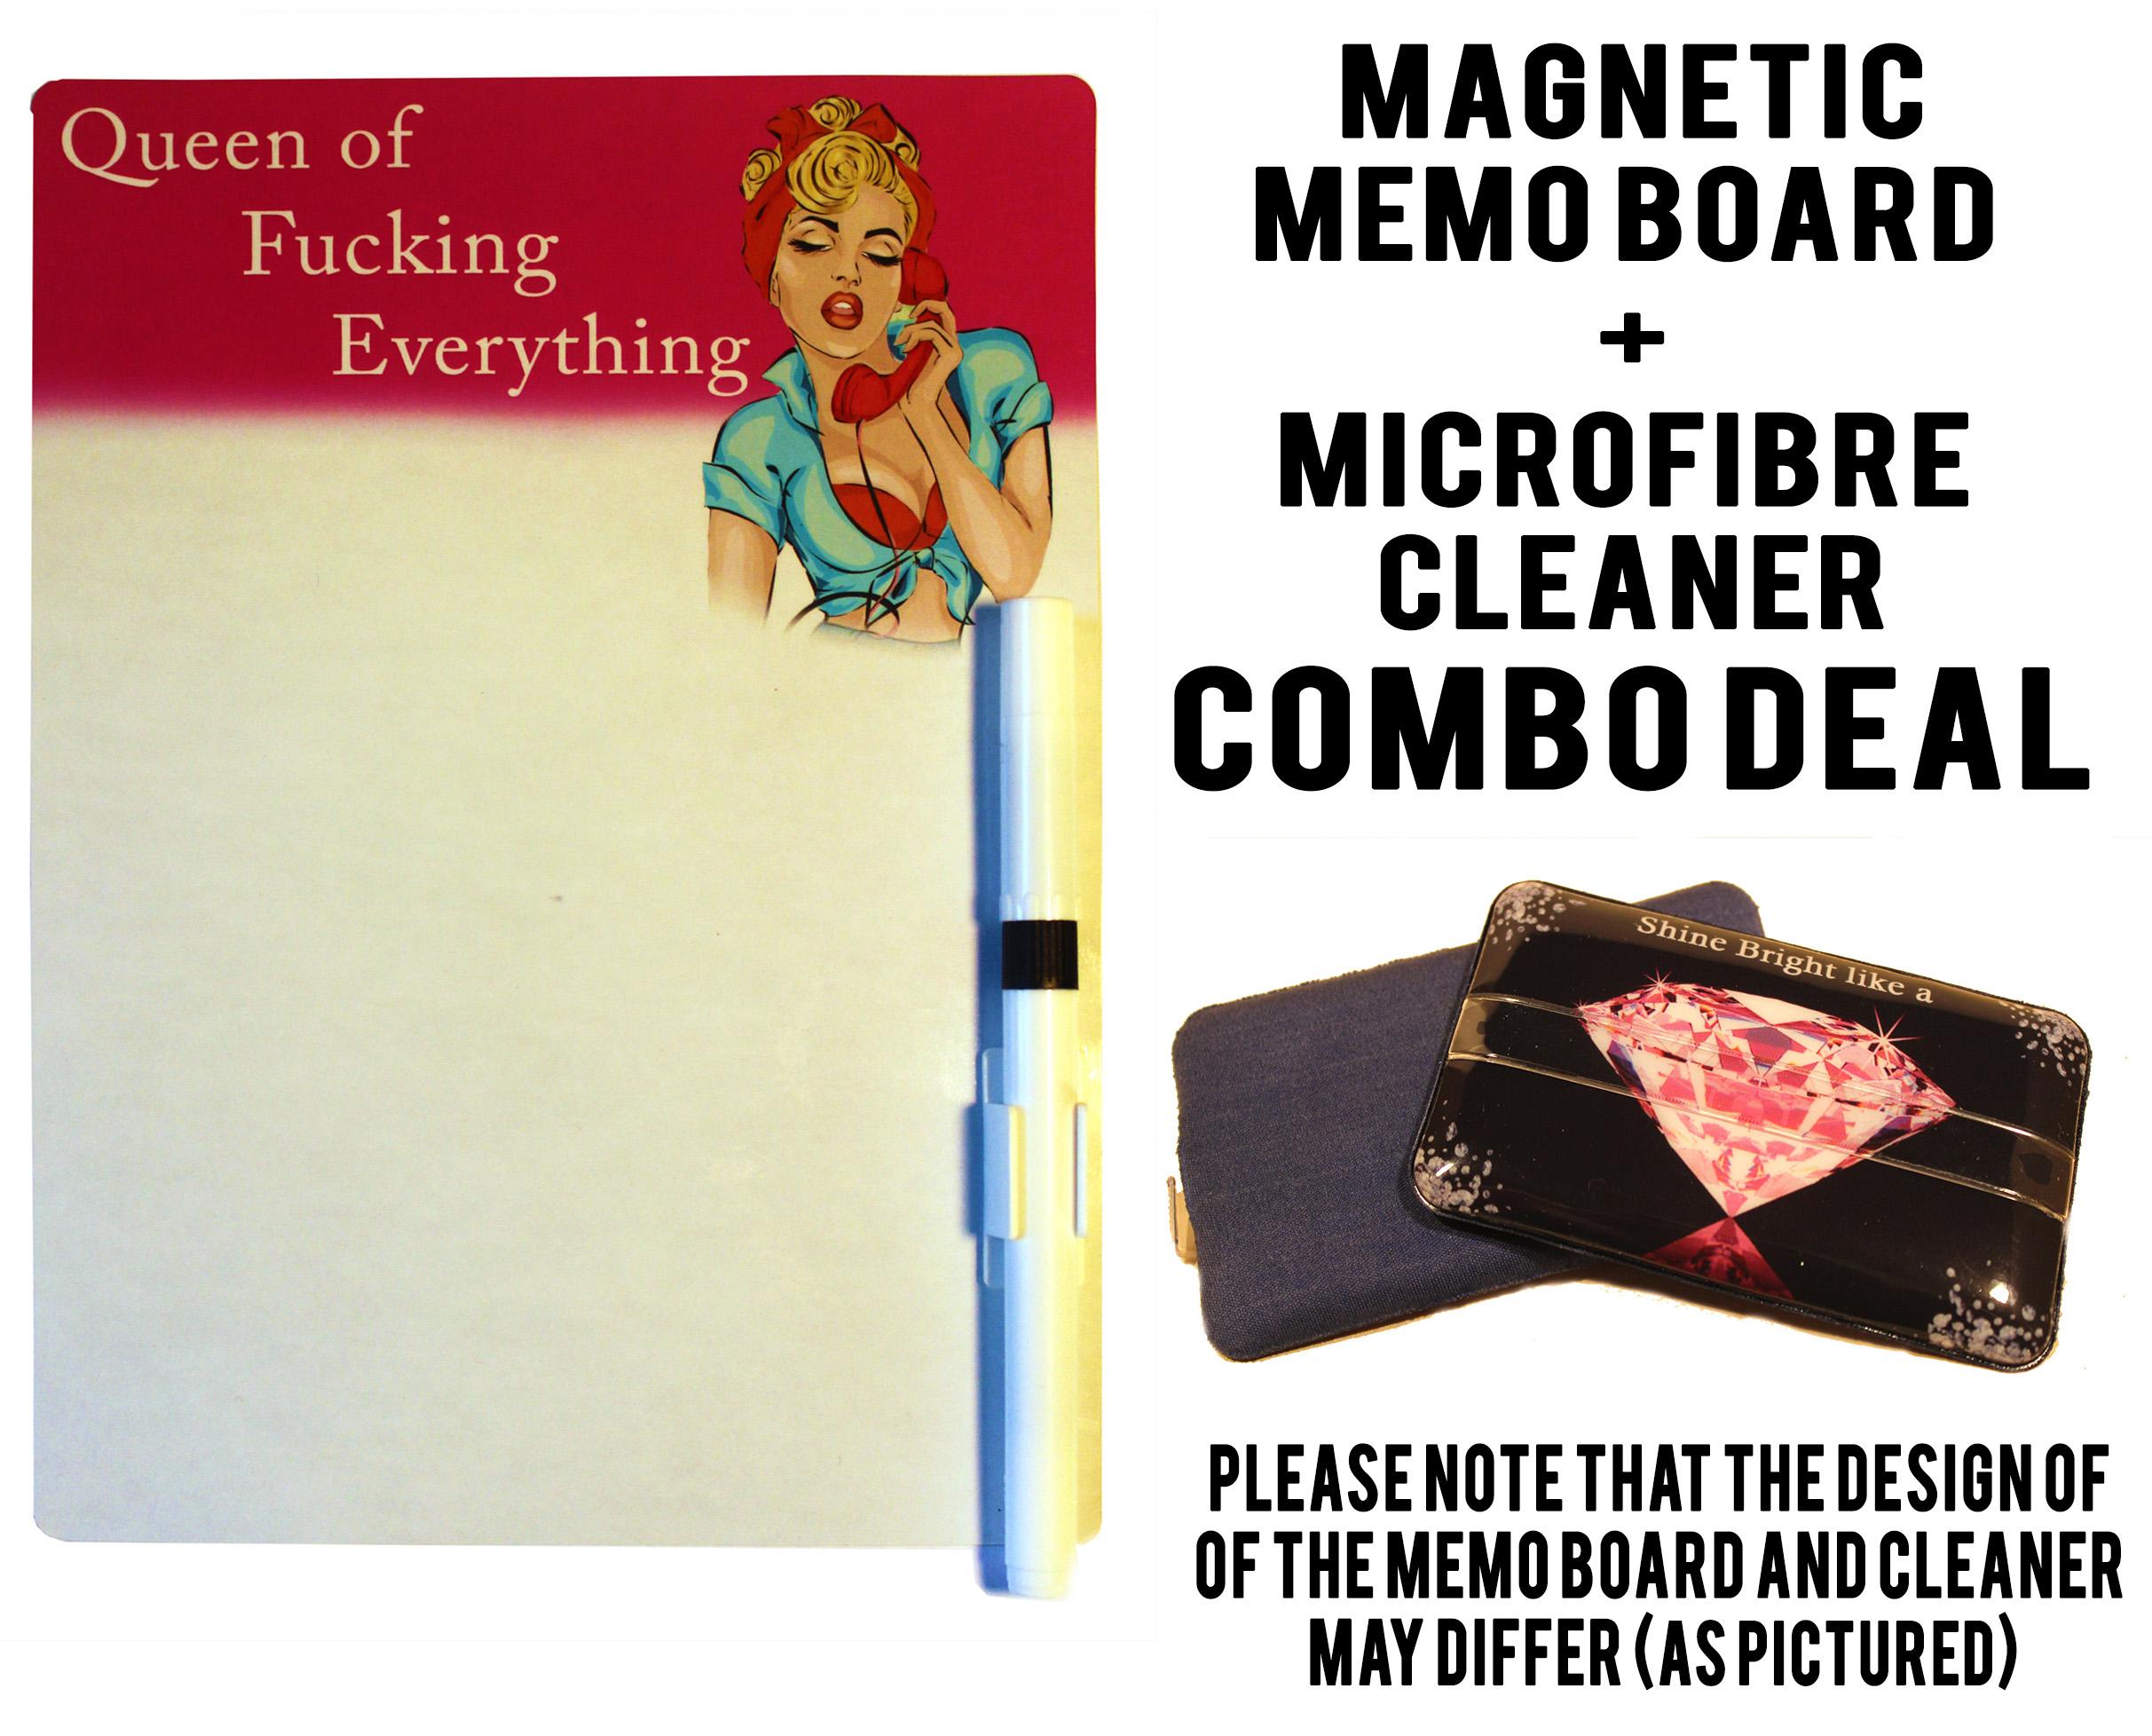 Queen of Fucking Everything Magnetic Reminder Memo board with cleaner